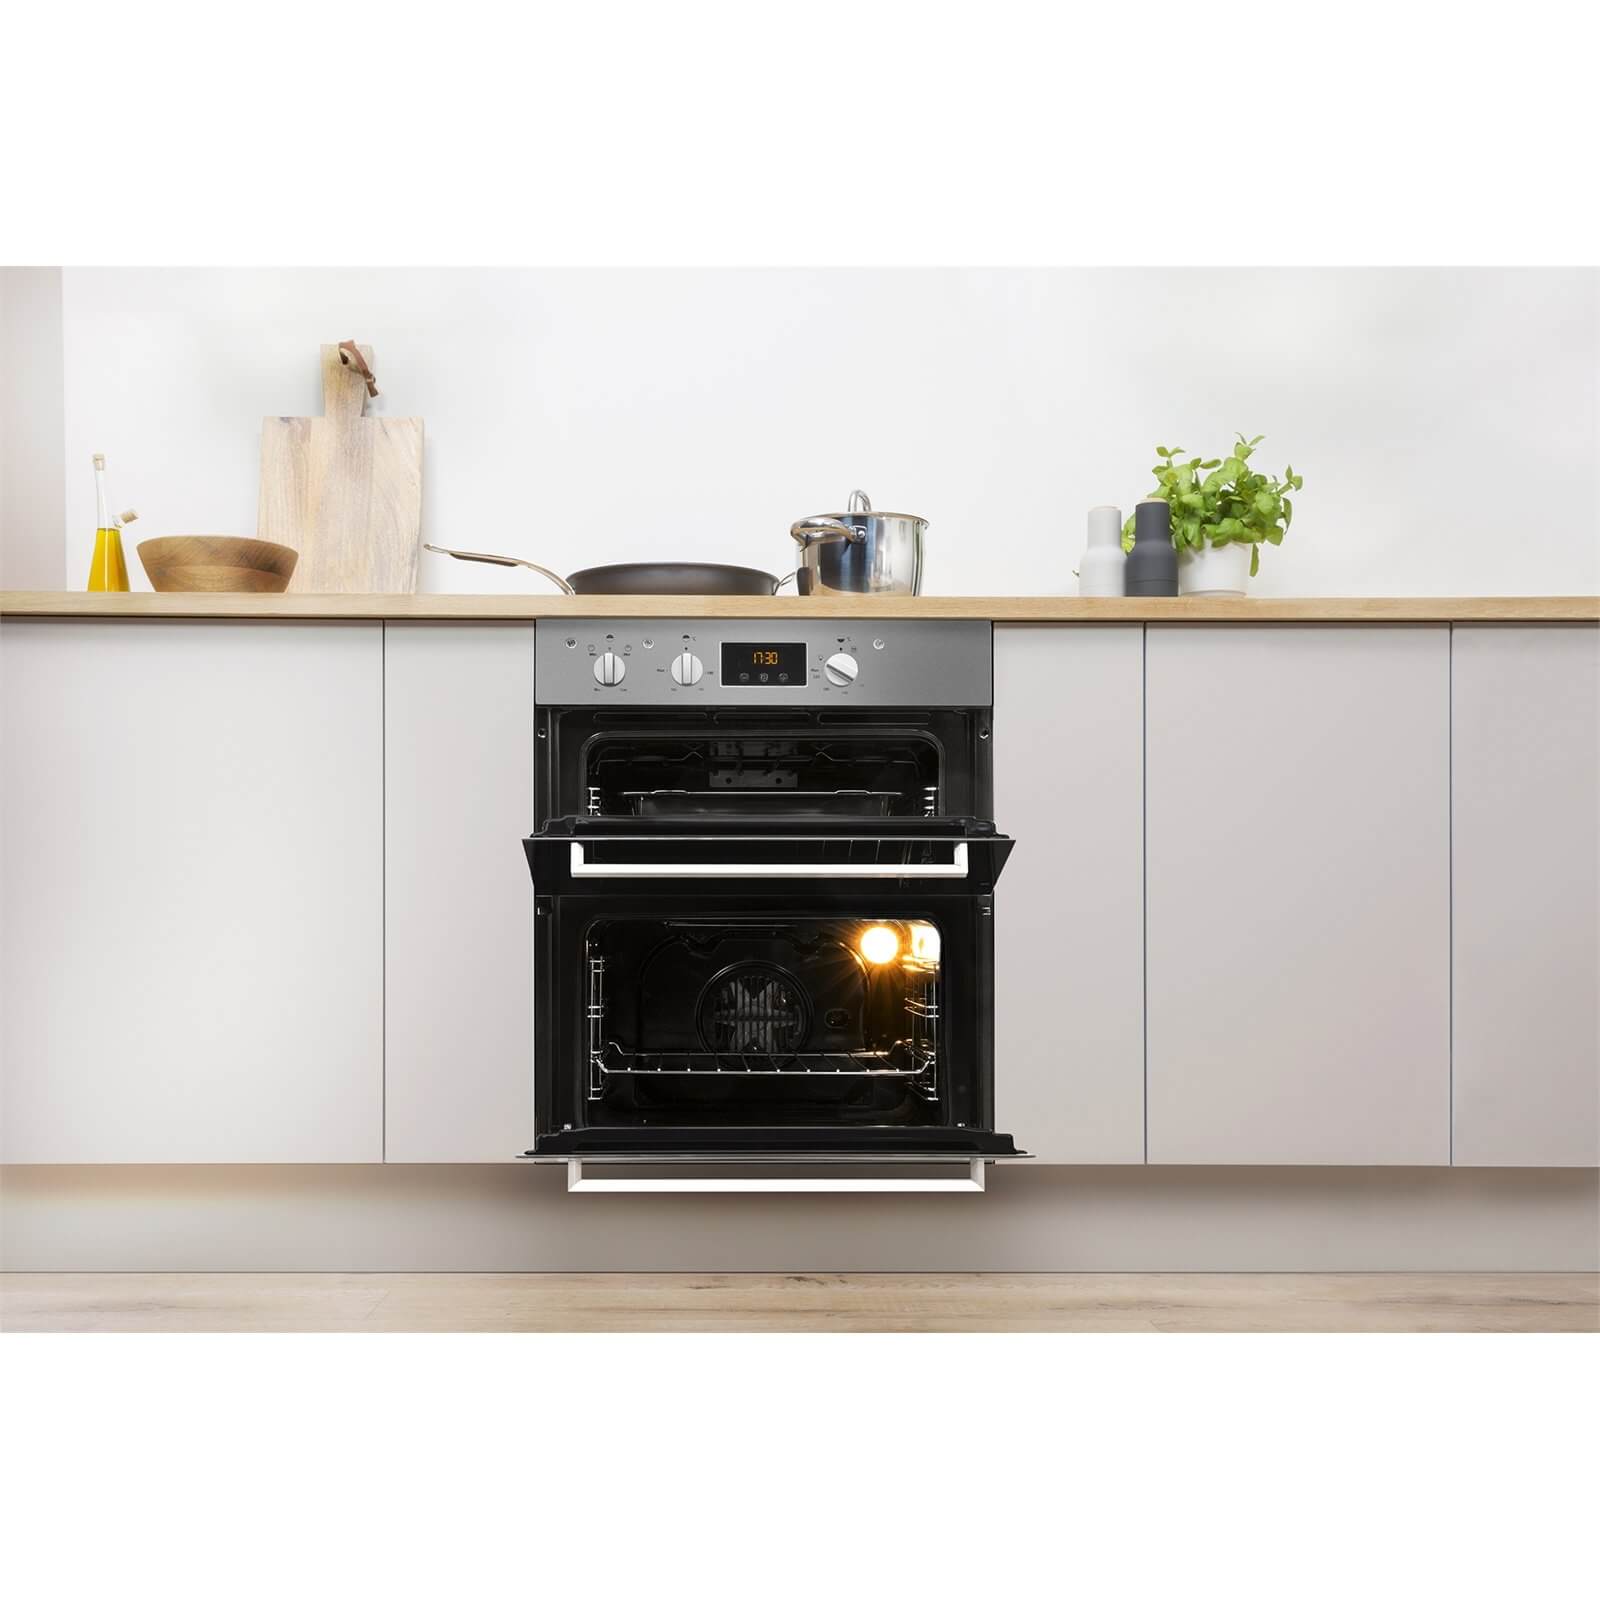 Indesit IDU 6340 IX Built-under Electric Oven - Stainless Steel